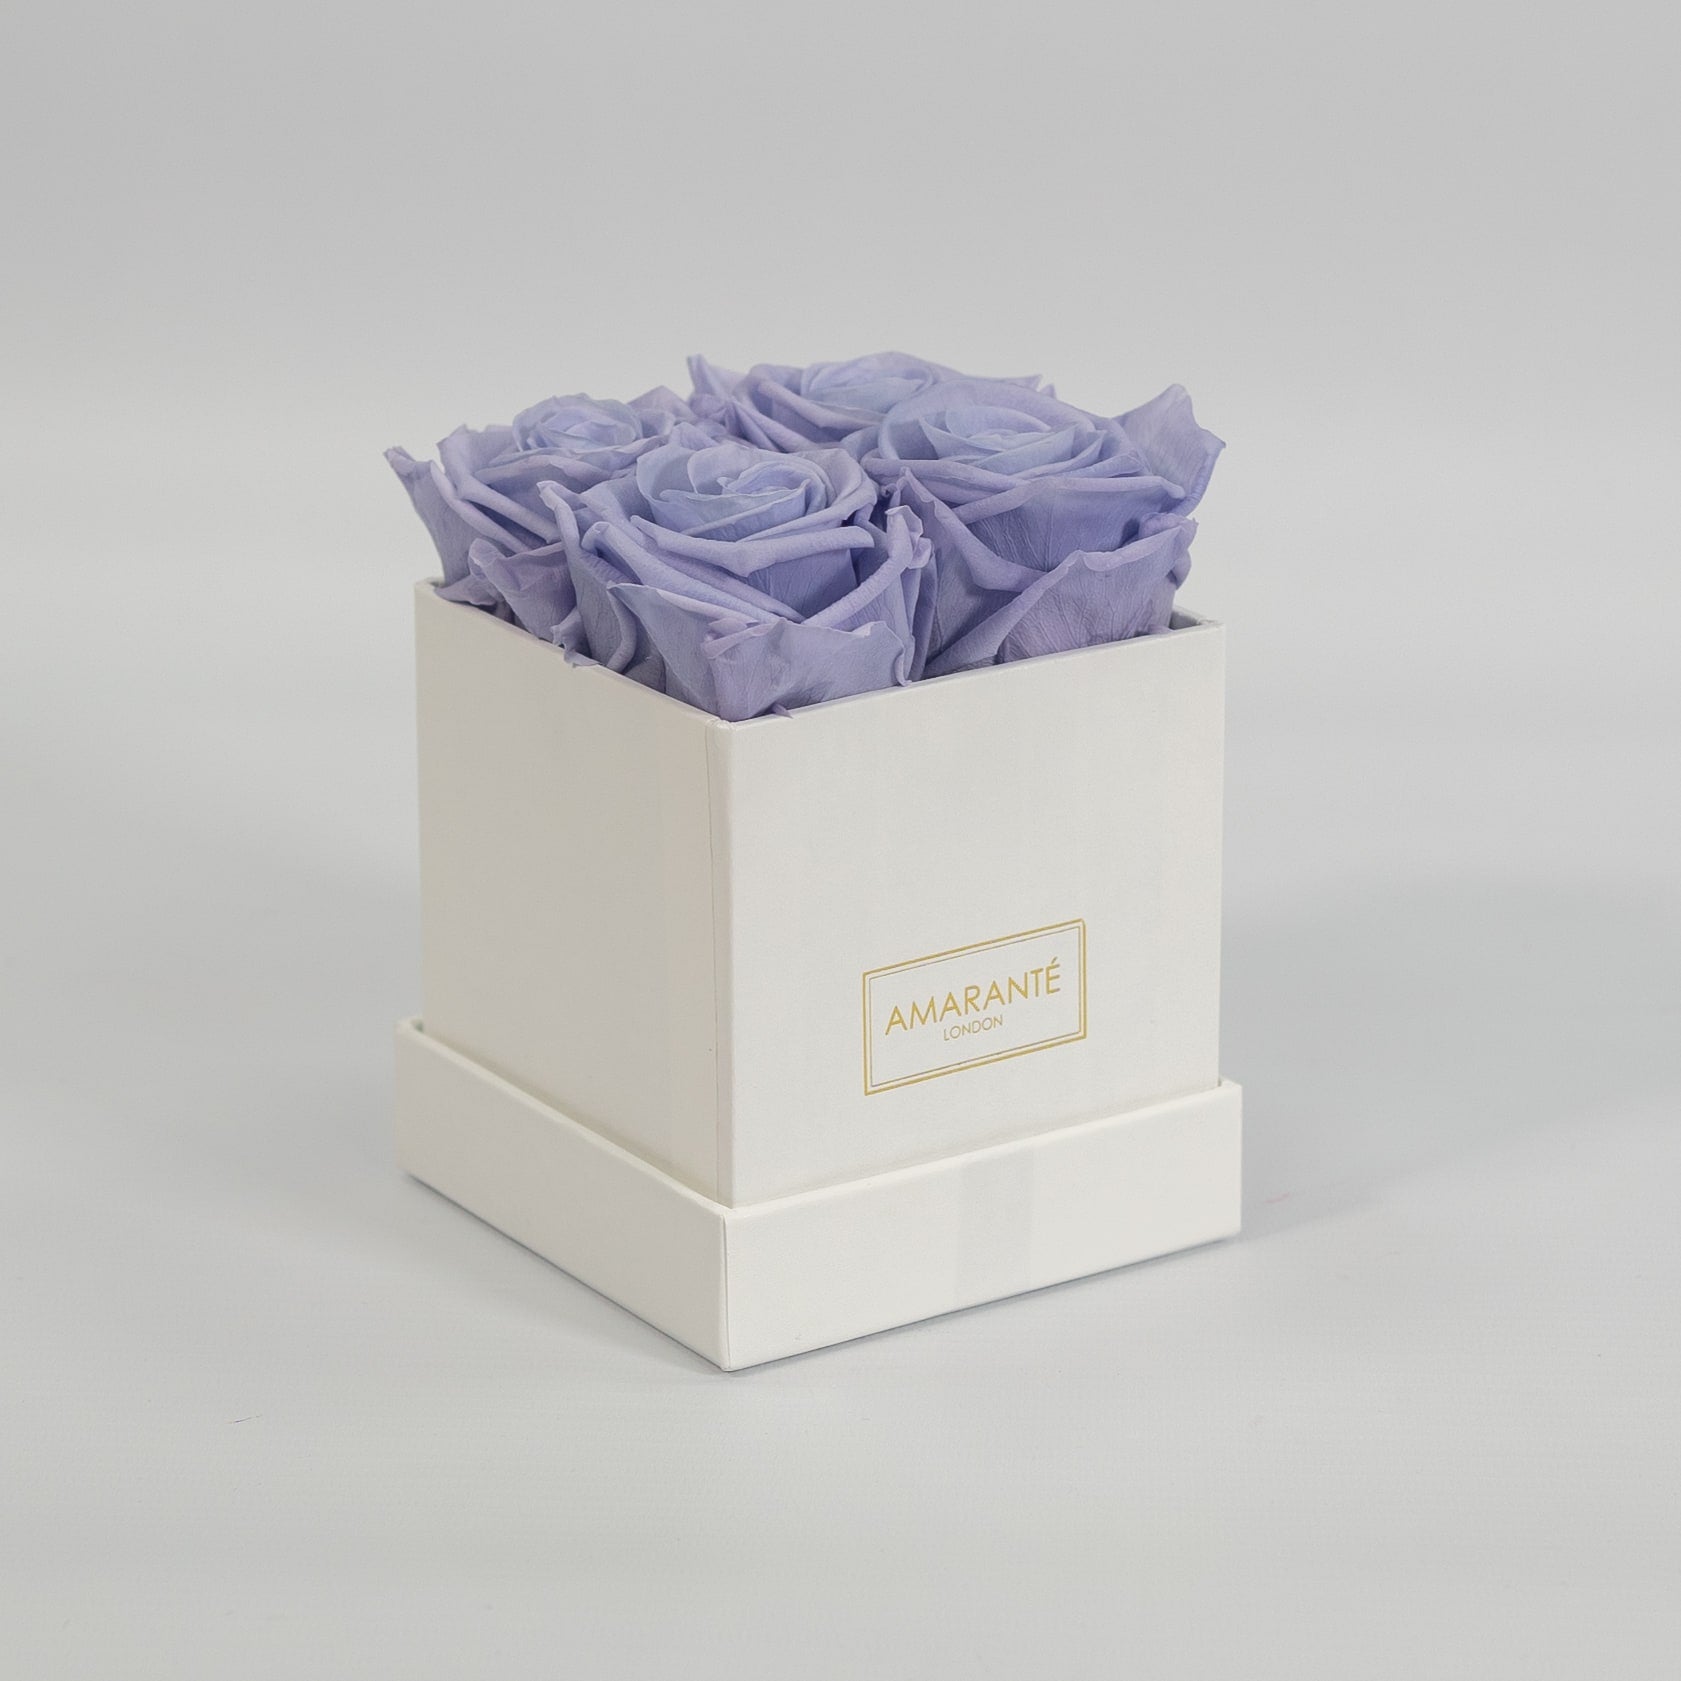 Artful lavender roses encompassed in a fashionable white box 